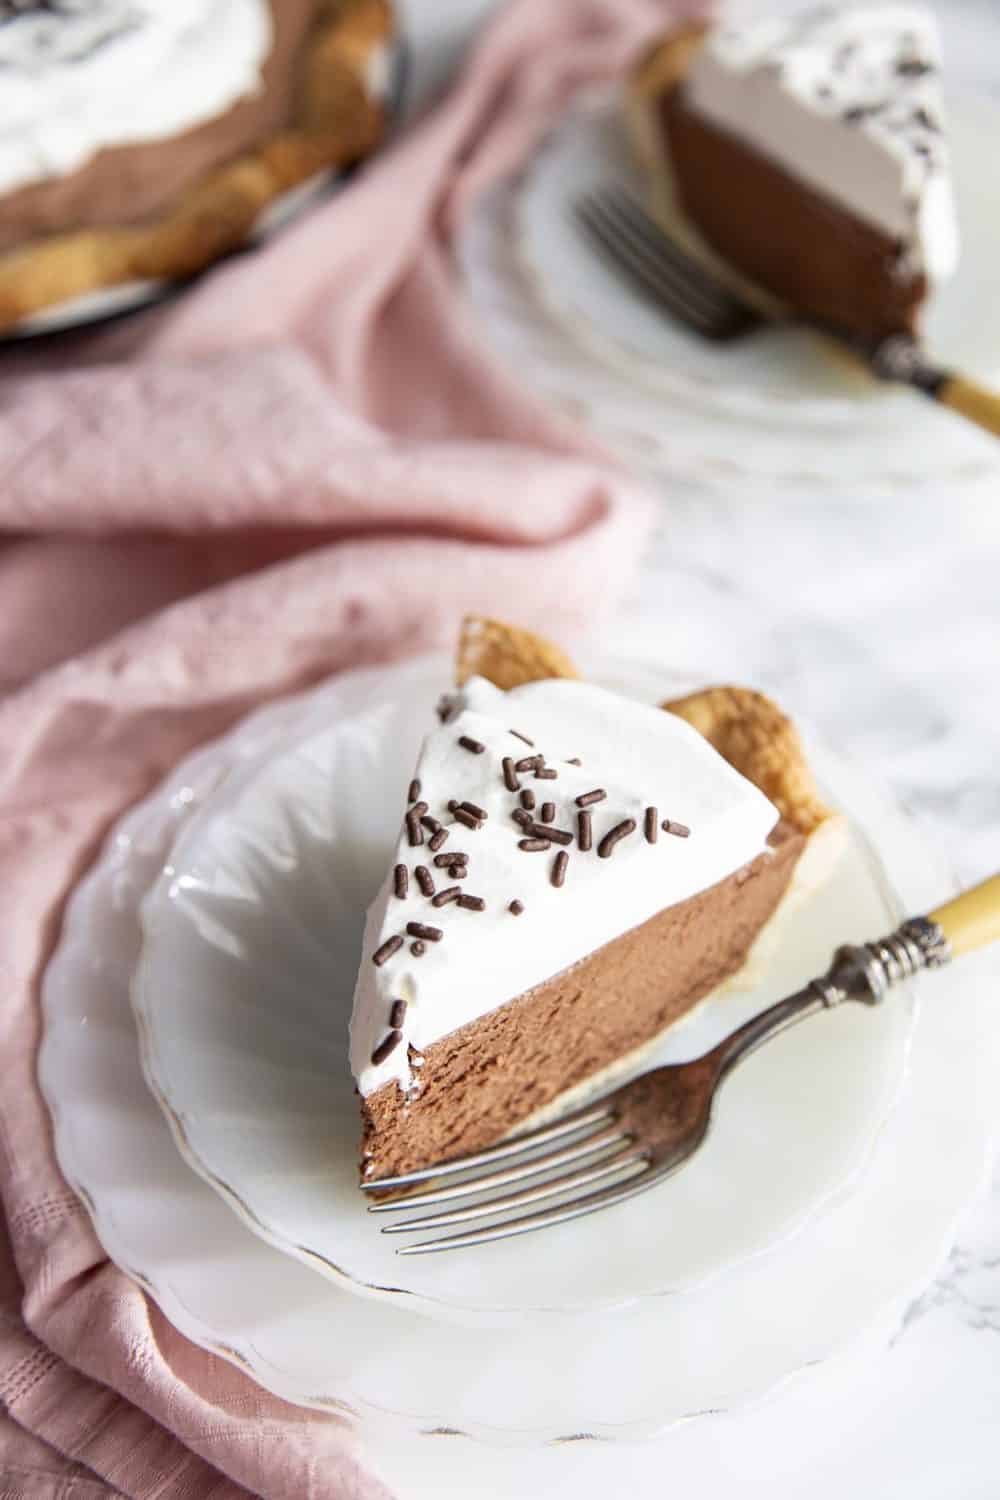 Slice of french silk pie on a plate.